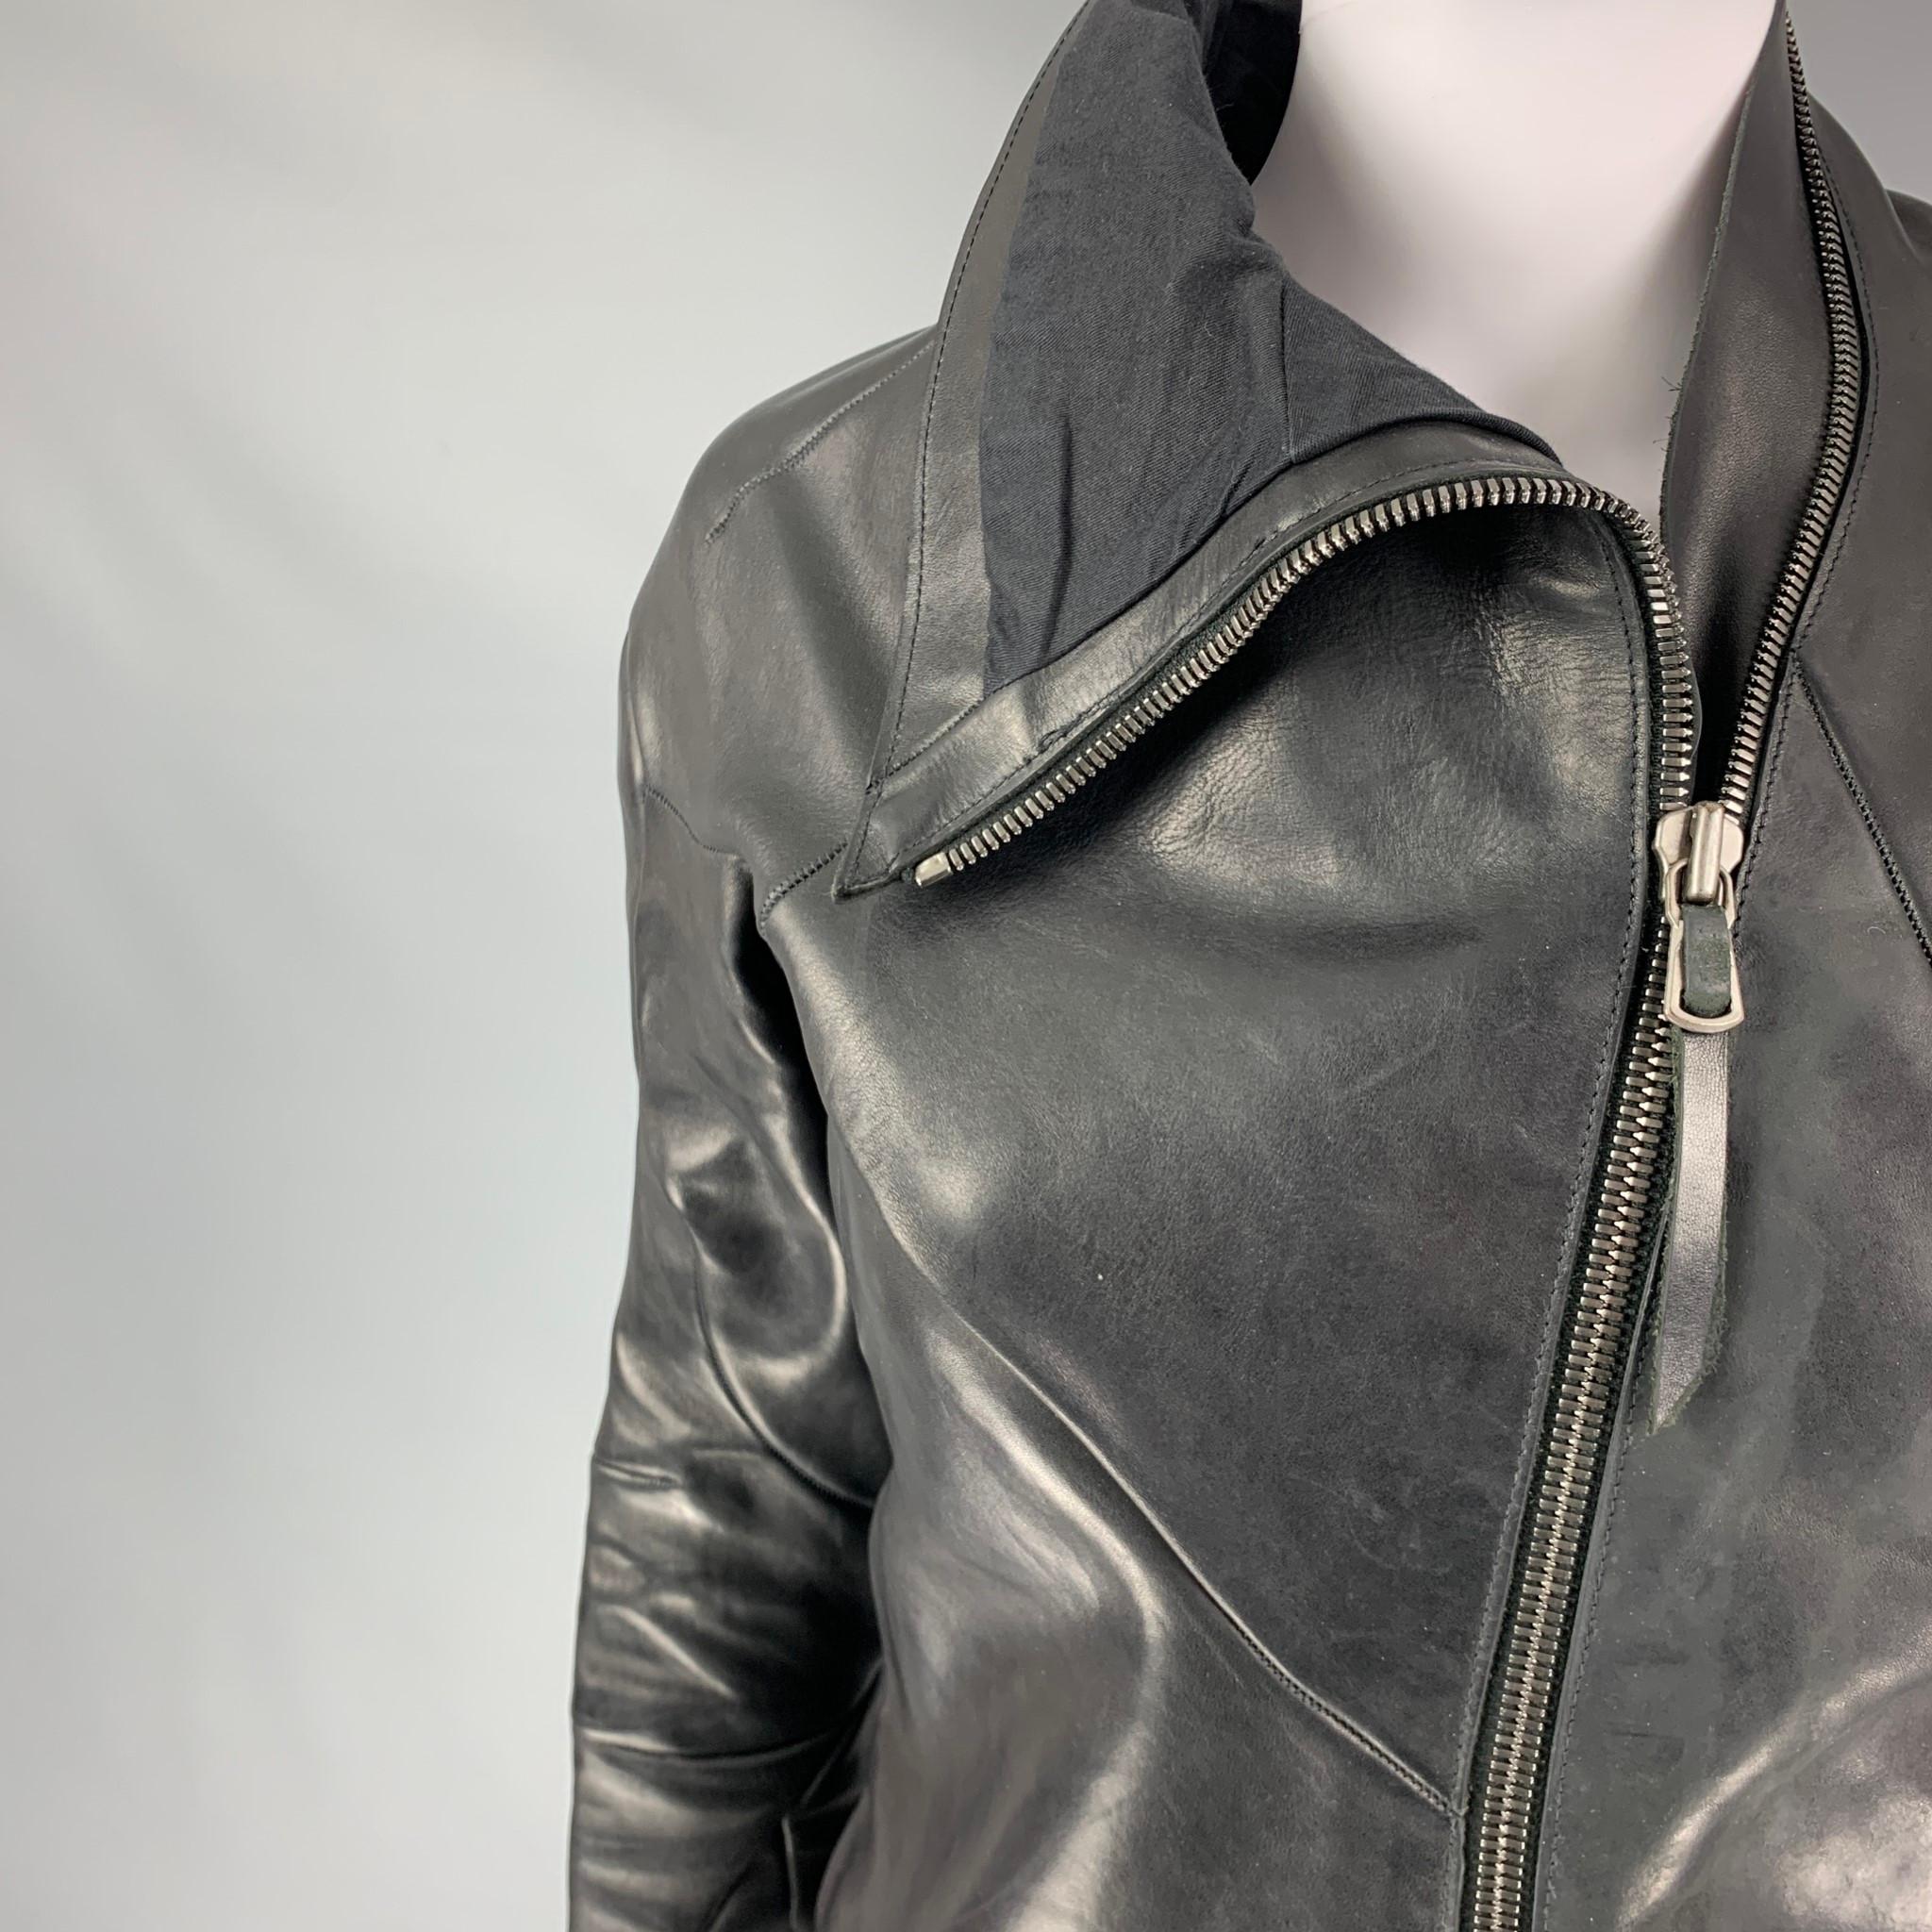 LEON EMANUEL BLANK jacket comes in a black horsehide leather featuring a slim fit, top stitching, high collar, and a asymmetrical zip up closure. Made in Spain.

Excellent Pre-Owned Condition.
Marked: 38
Original Retail Price: